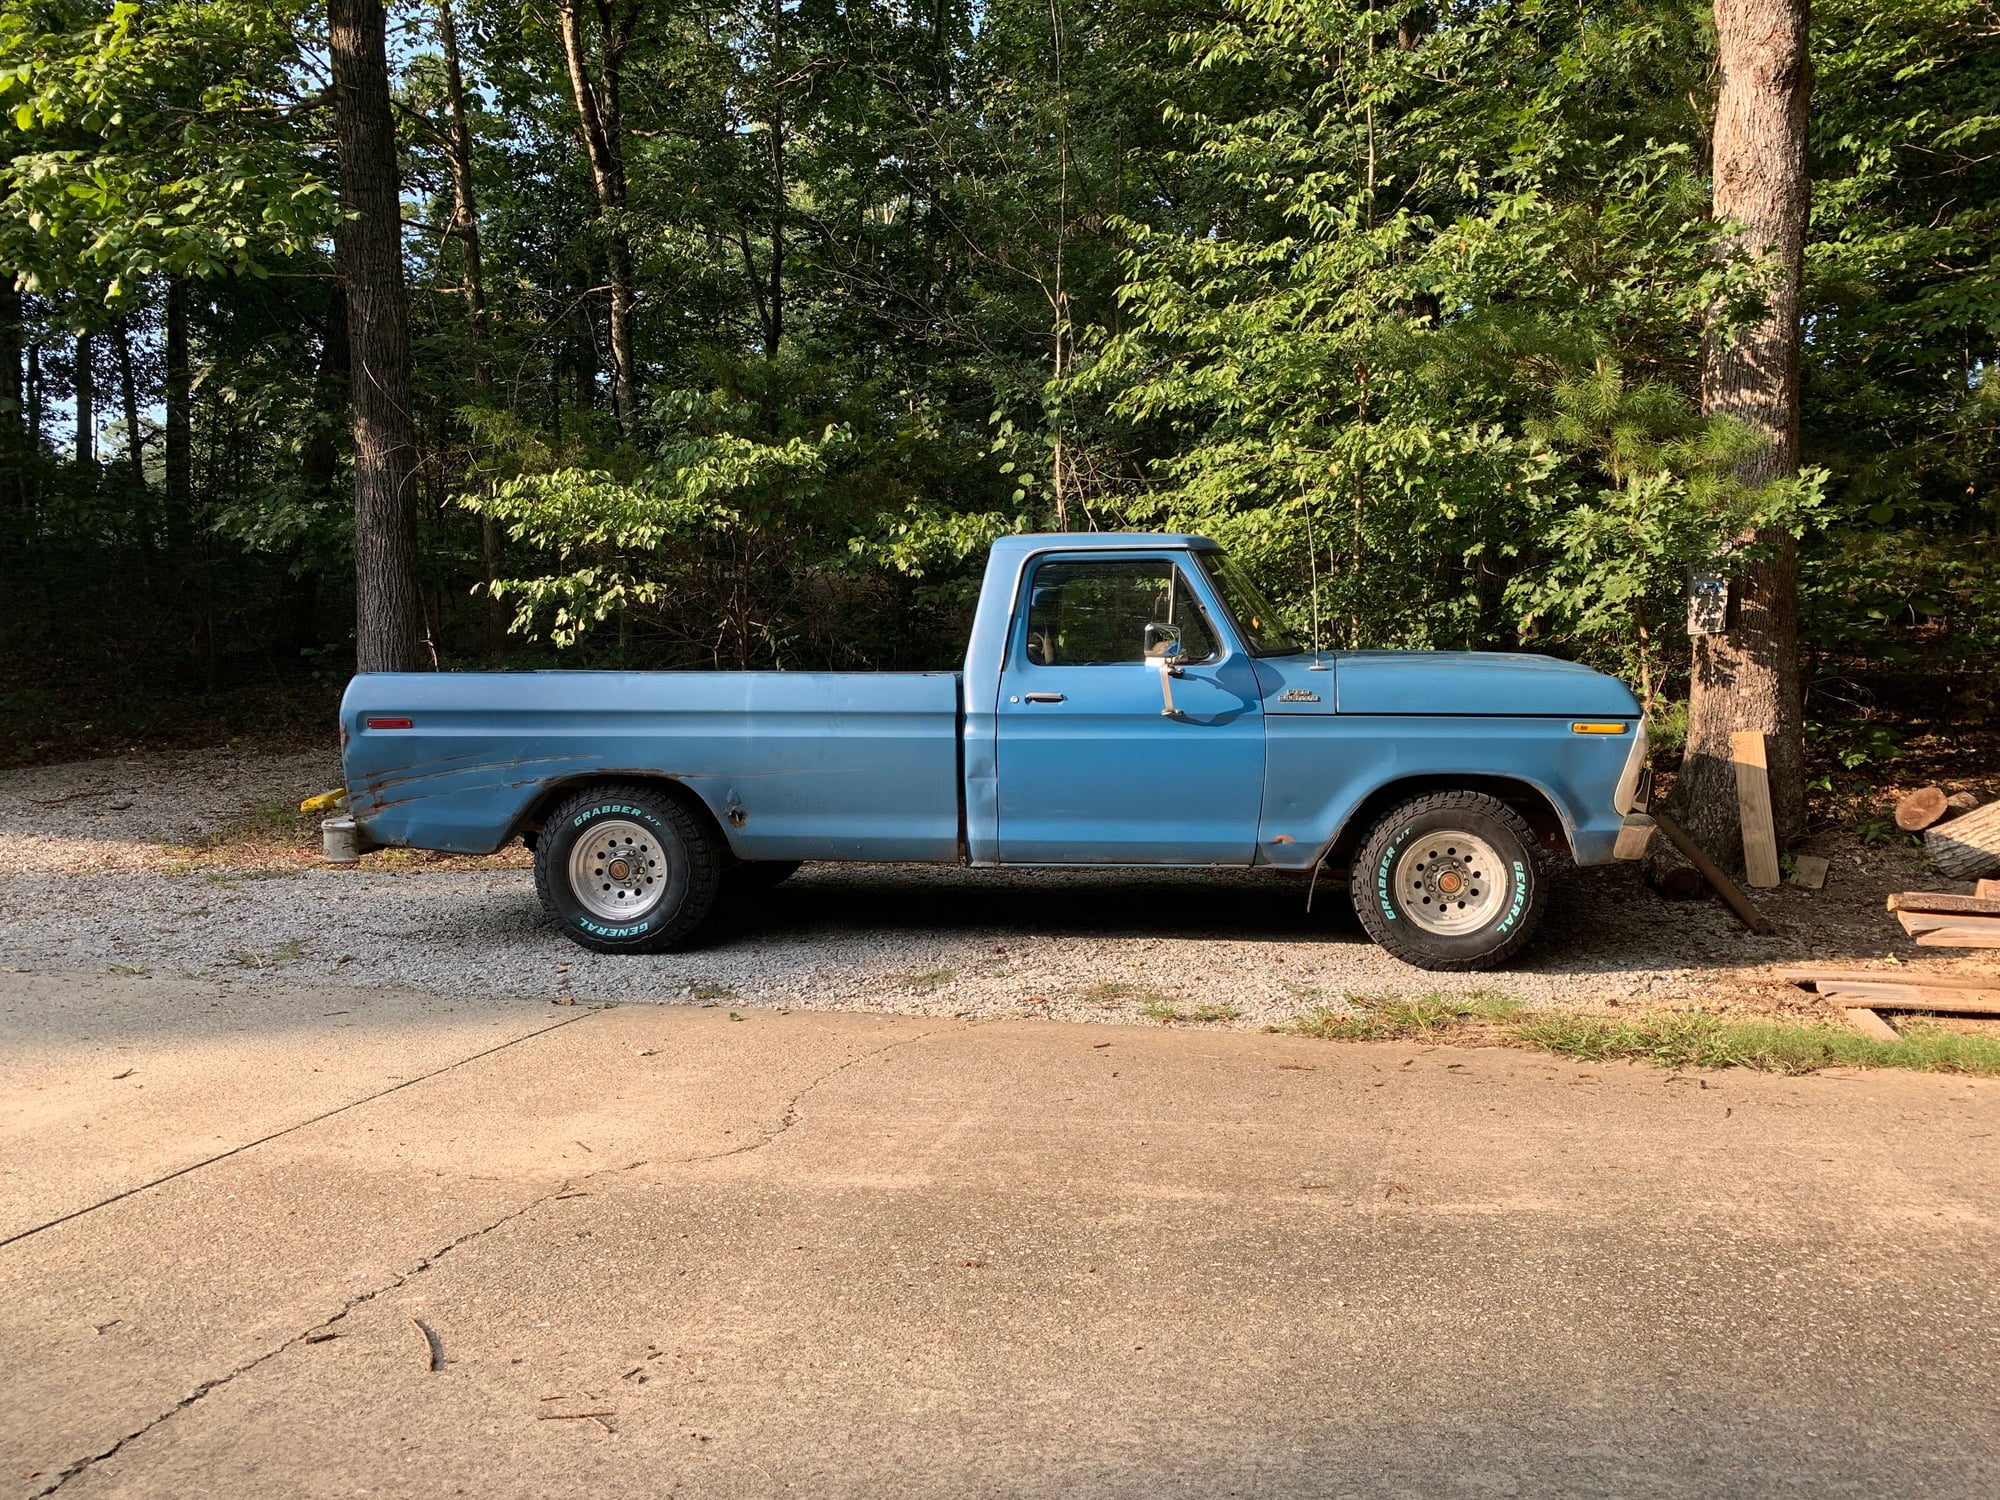 Light blue Ford Truck Enthusiasts Forums